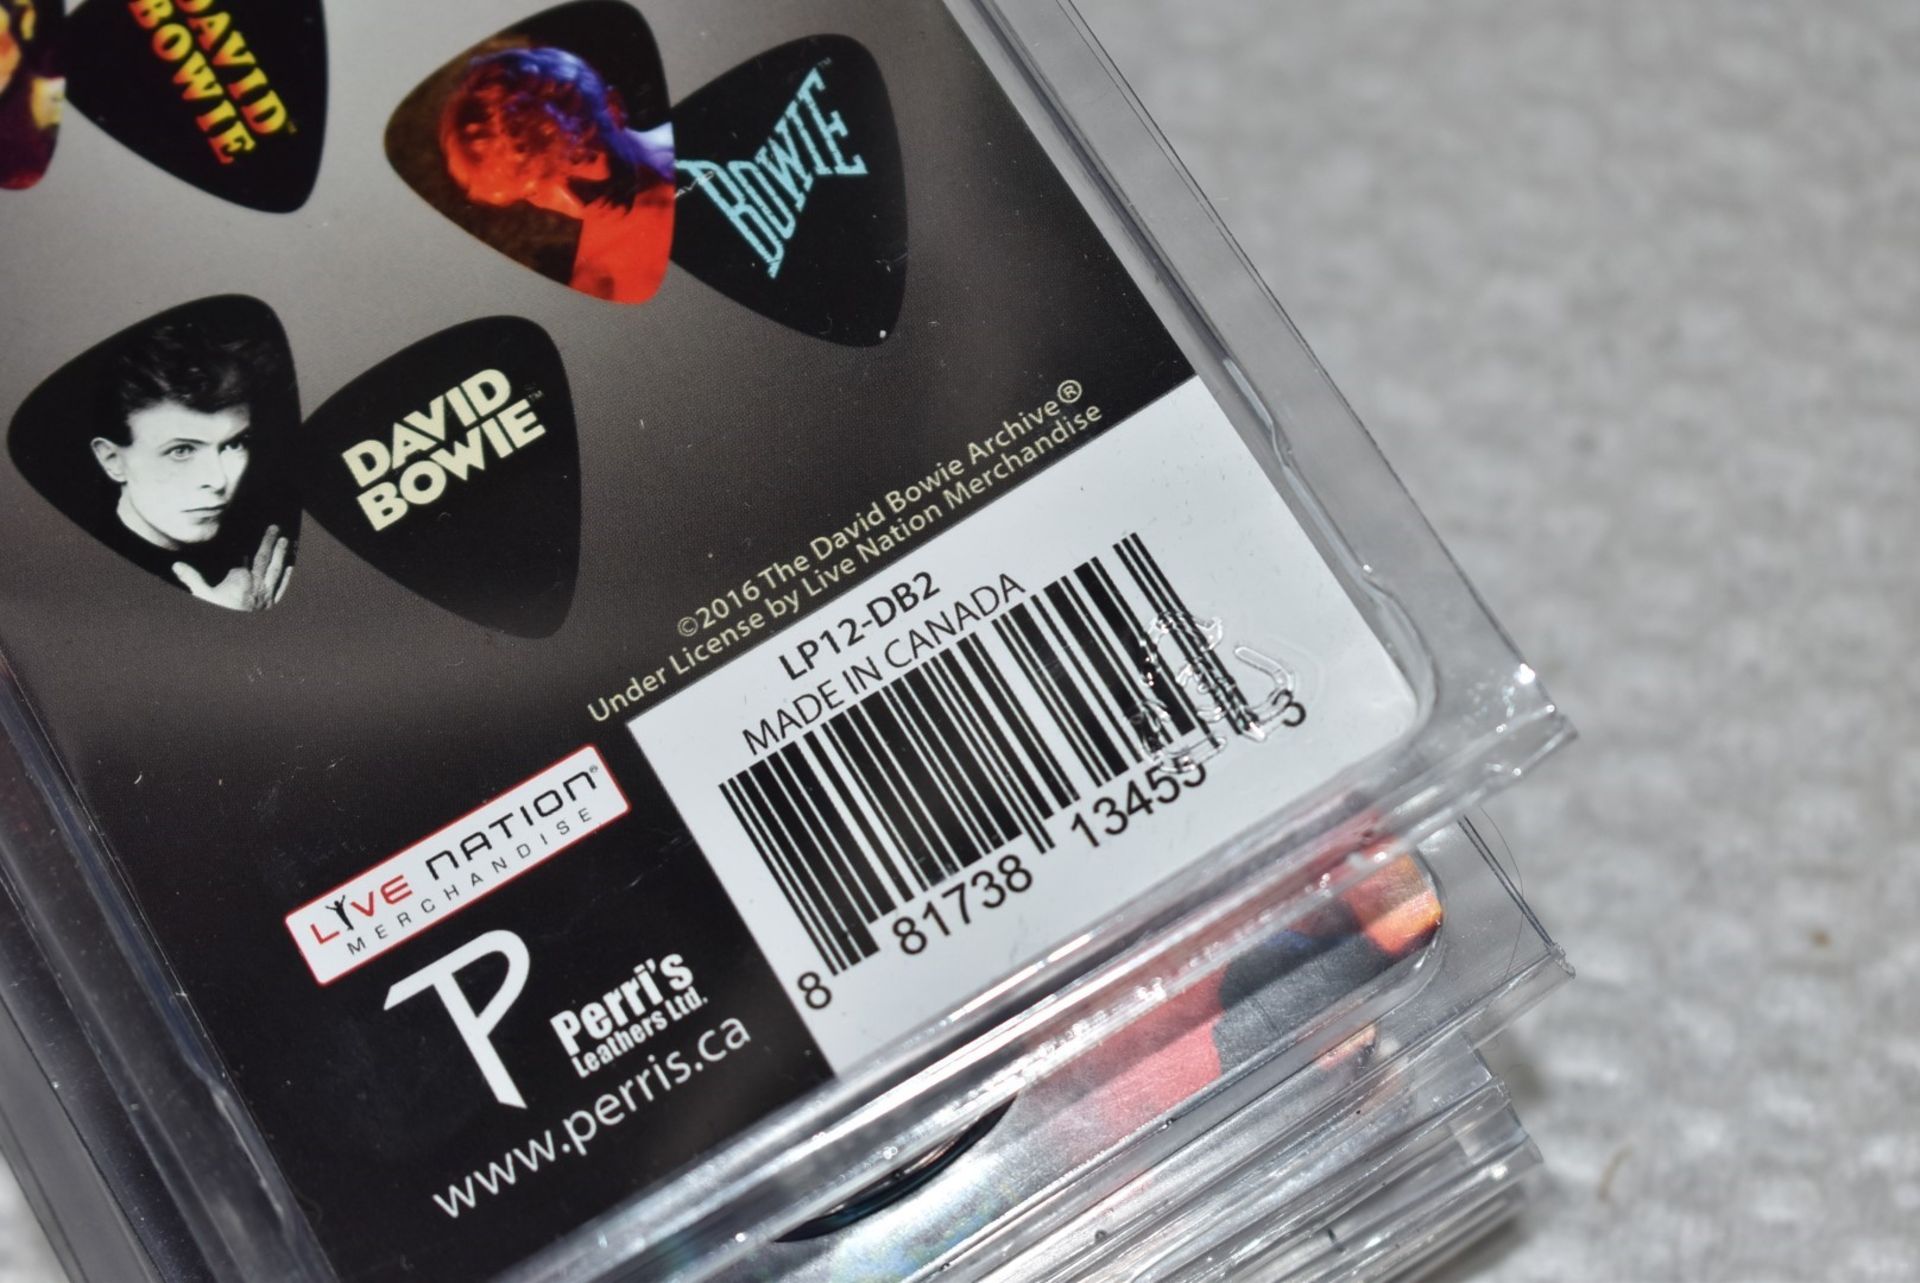 10 x David Bowie Guitar Pick Multipacks By Perri's - 6 Picks Per Pack - Officially Licensed - Image 6 of 7